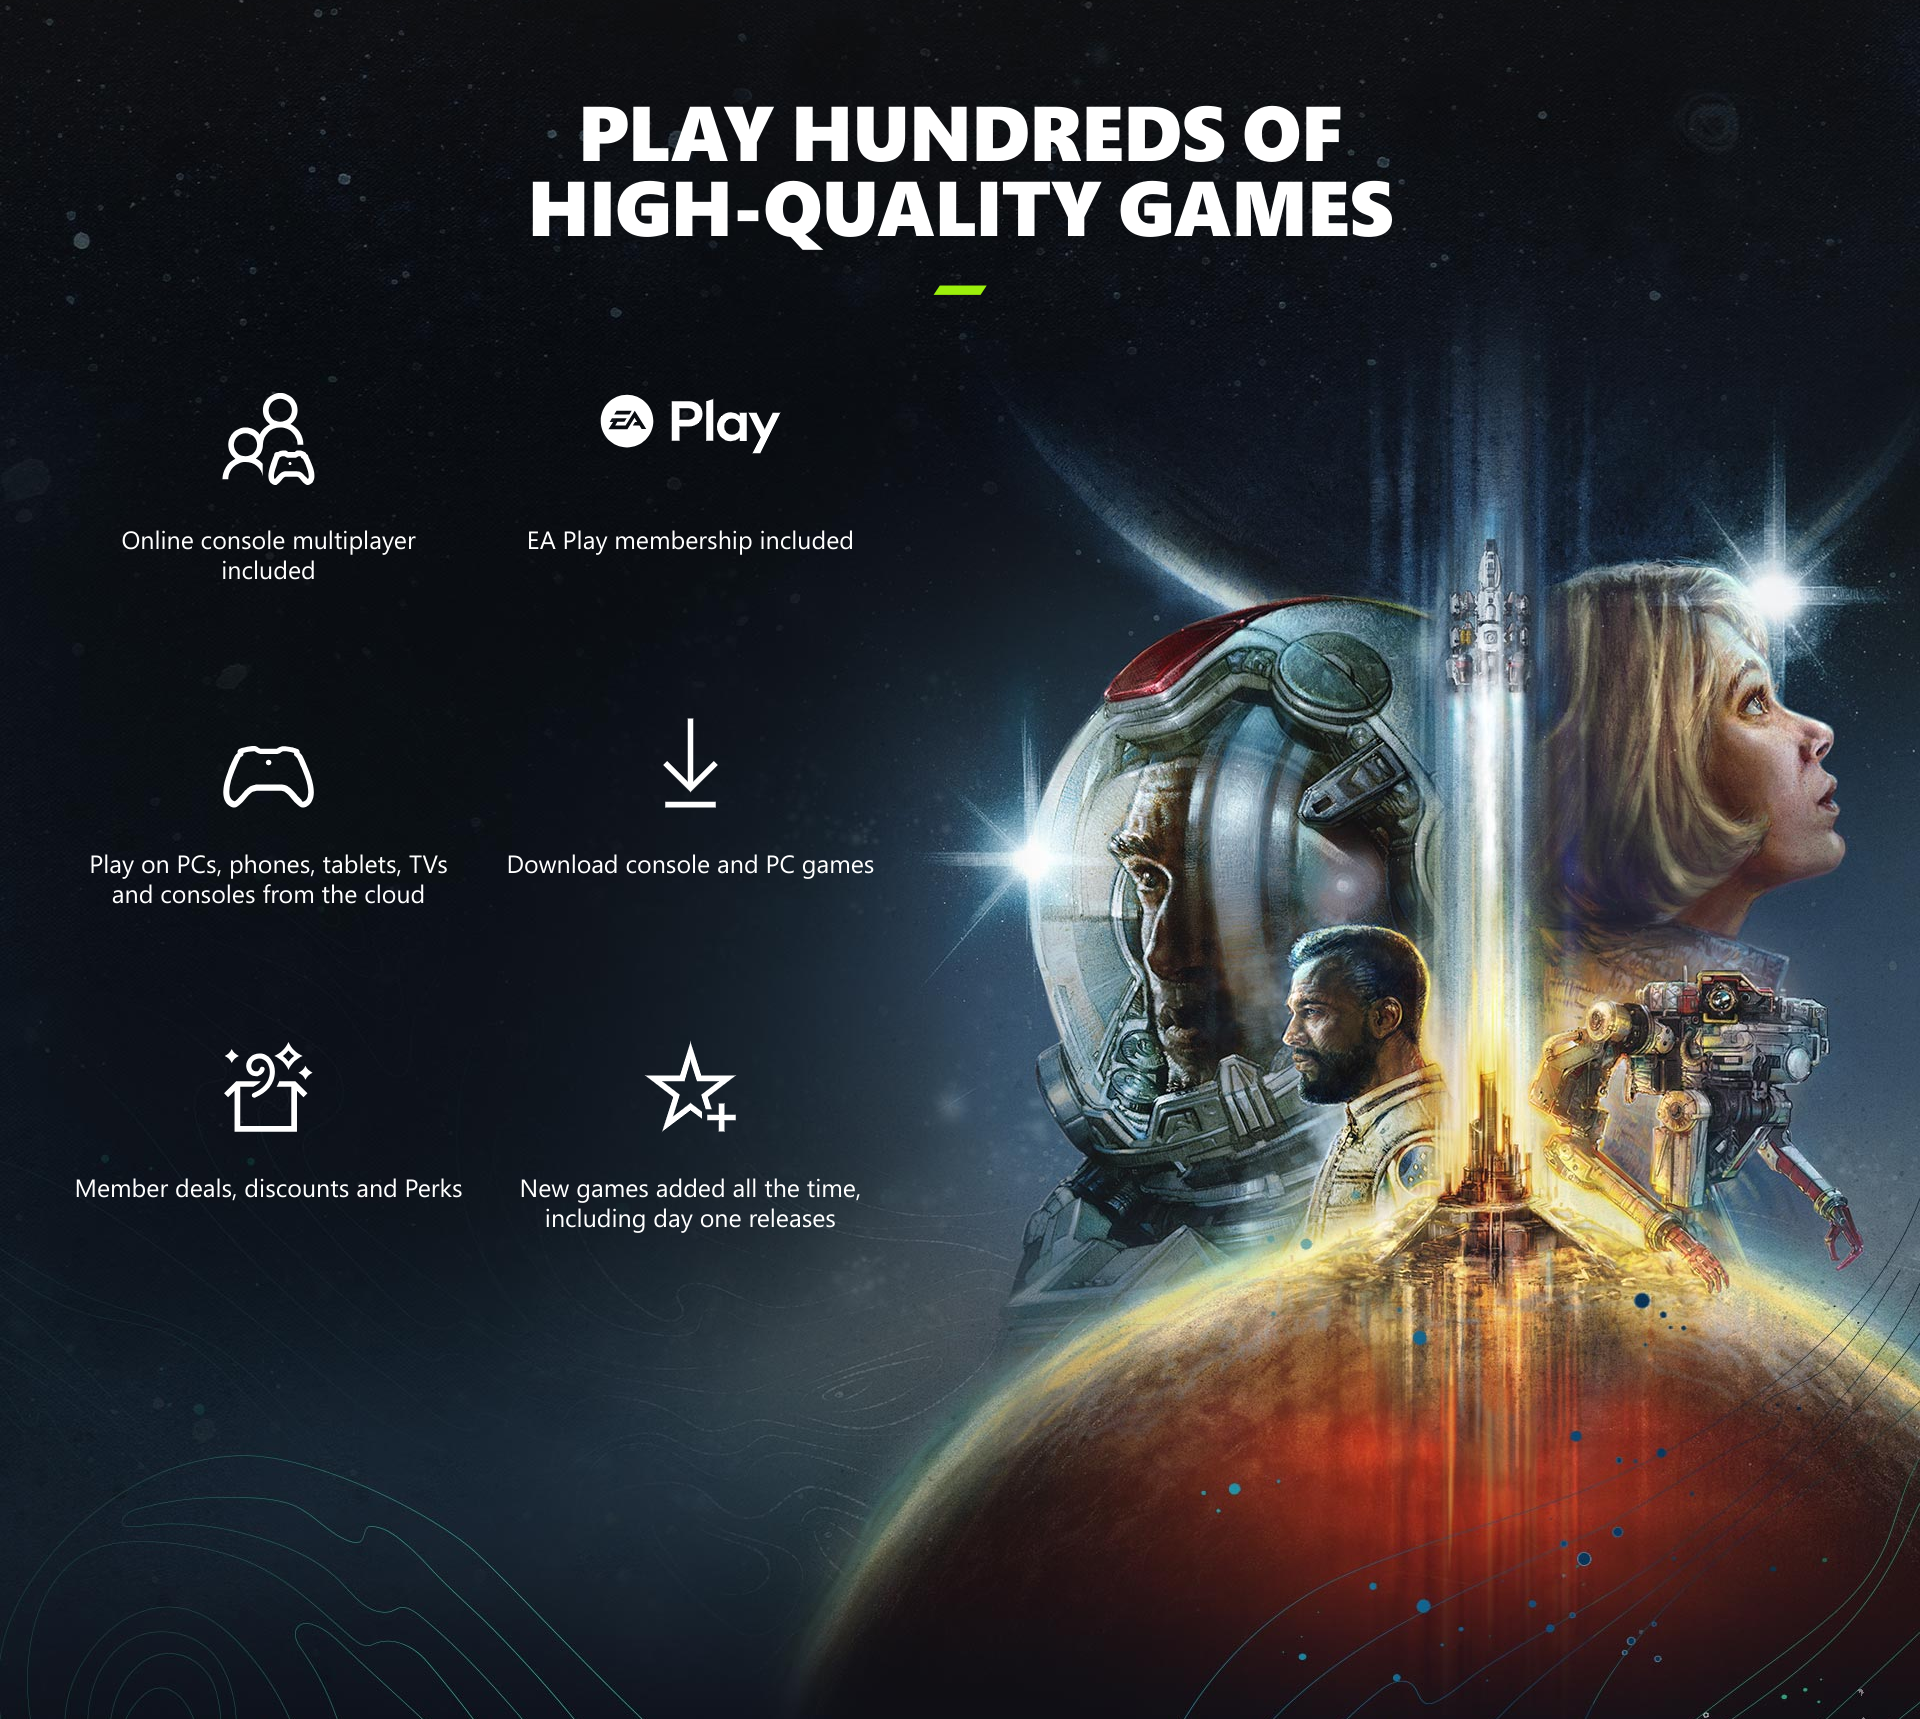 a promotional poster for xbox game pass that outlines many of the benefits included in the subscription plan